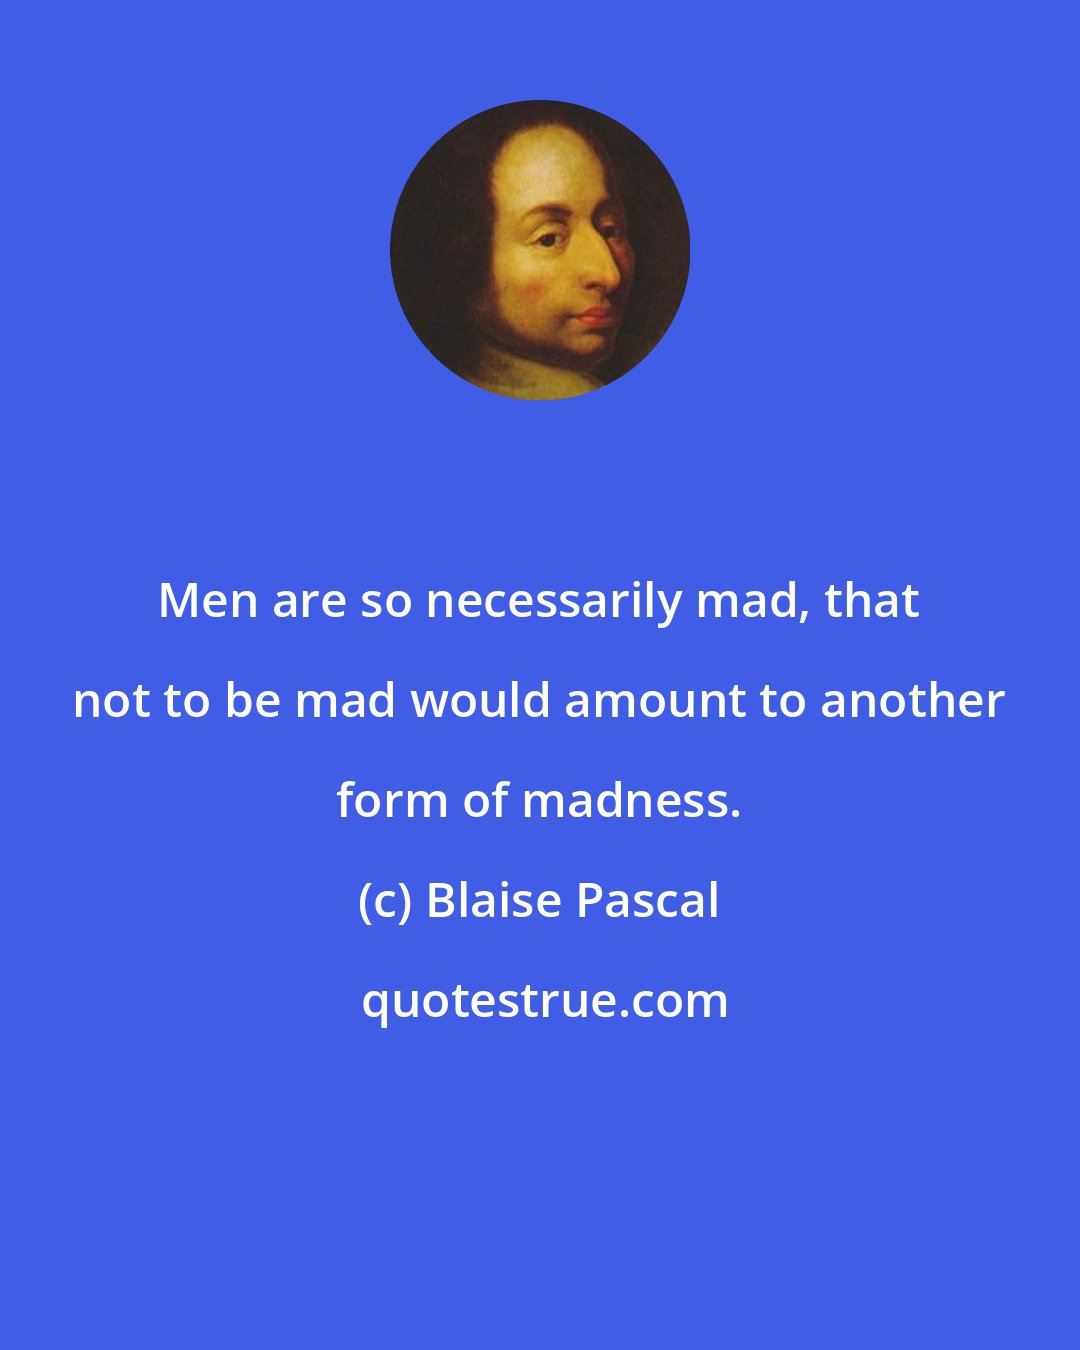 Blaise Pascal: Men are so necessarily mad, that not to be mad would amount to another form of madness.